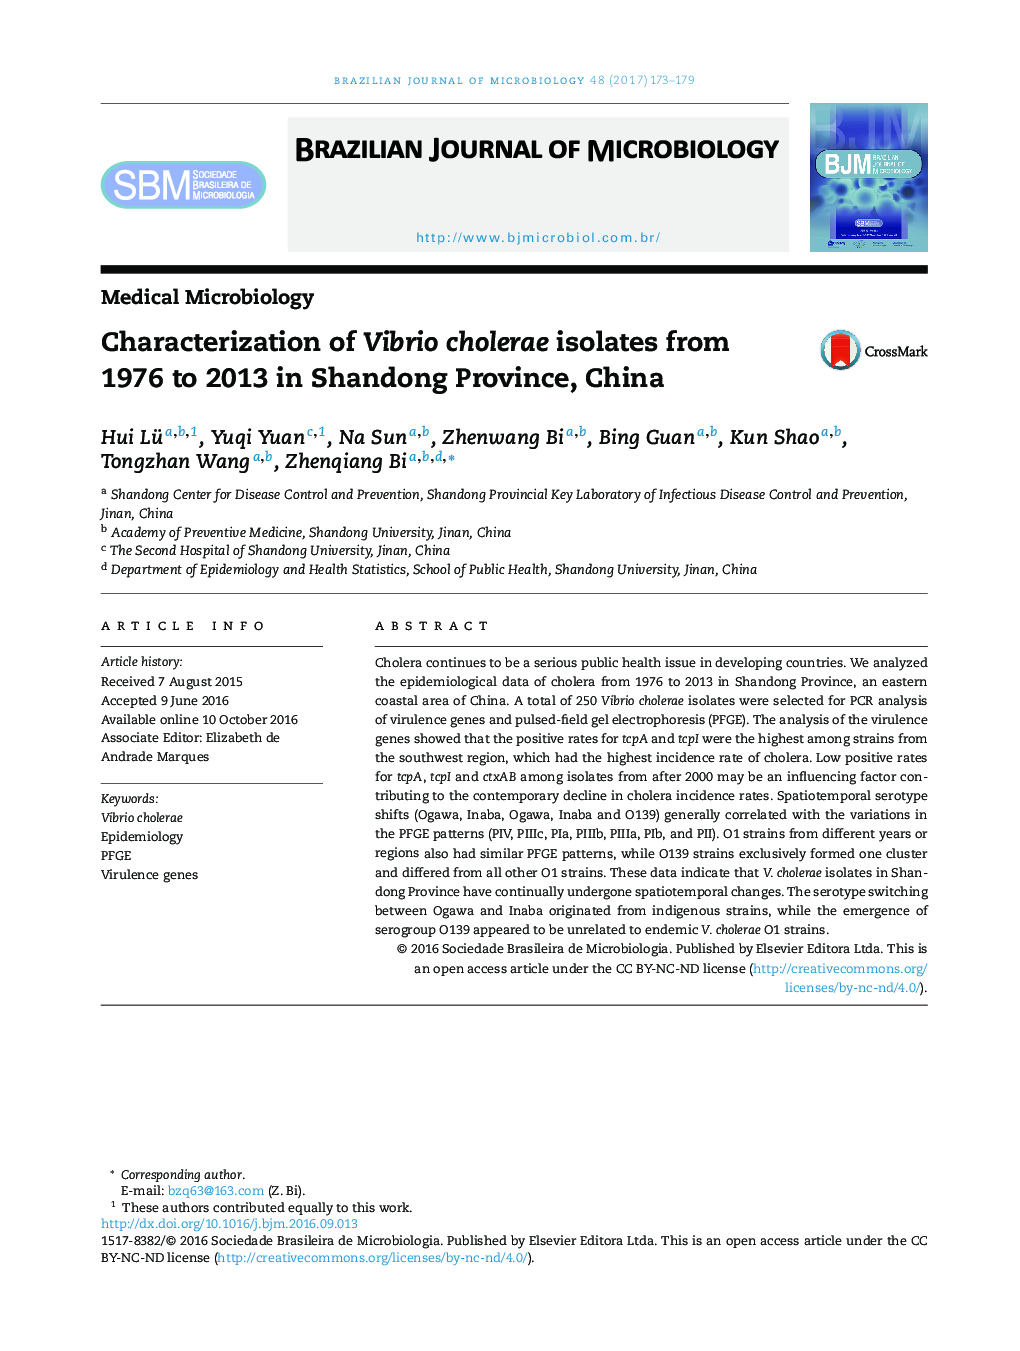 Characterization of Vibrio cholerae isolates from 1976 to 2013 in Shandong Province, China